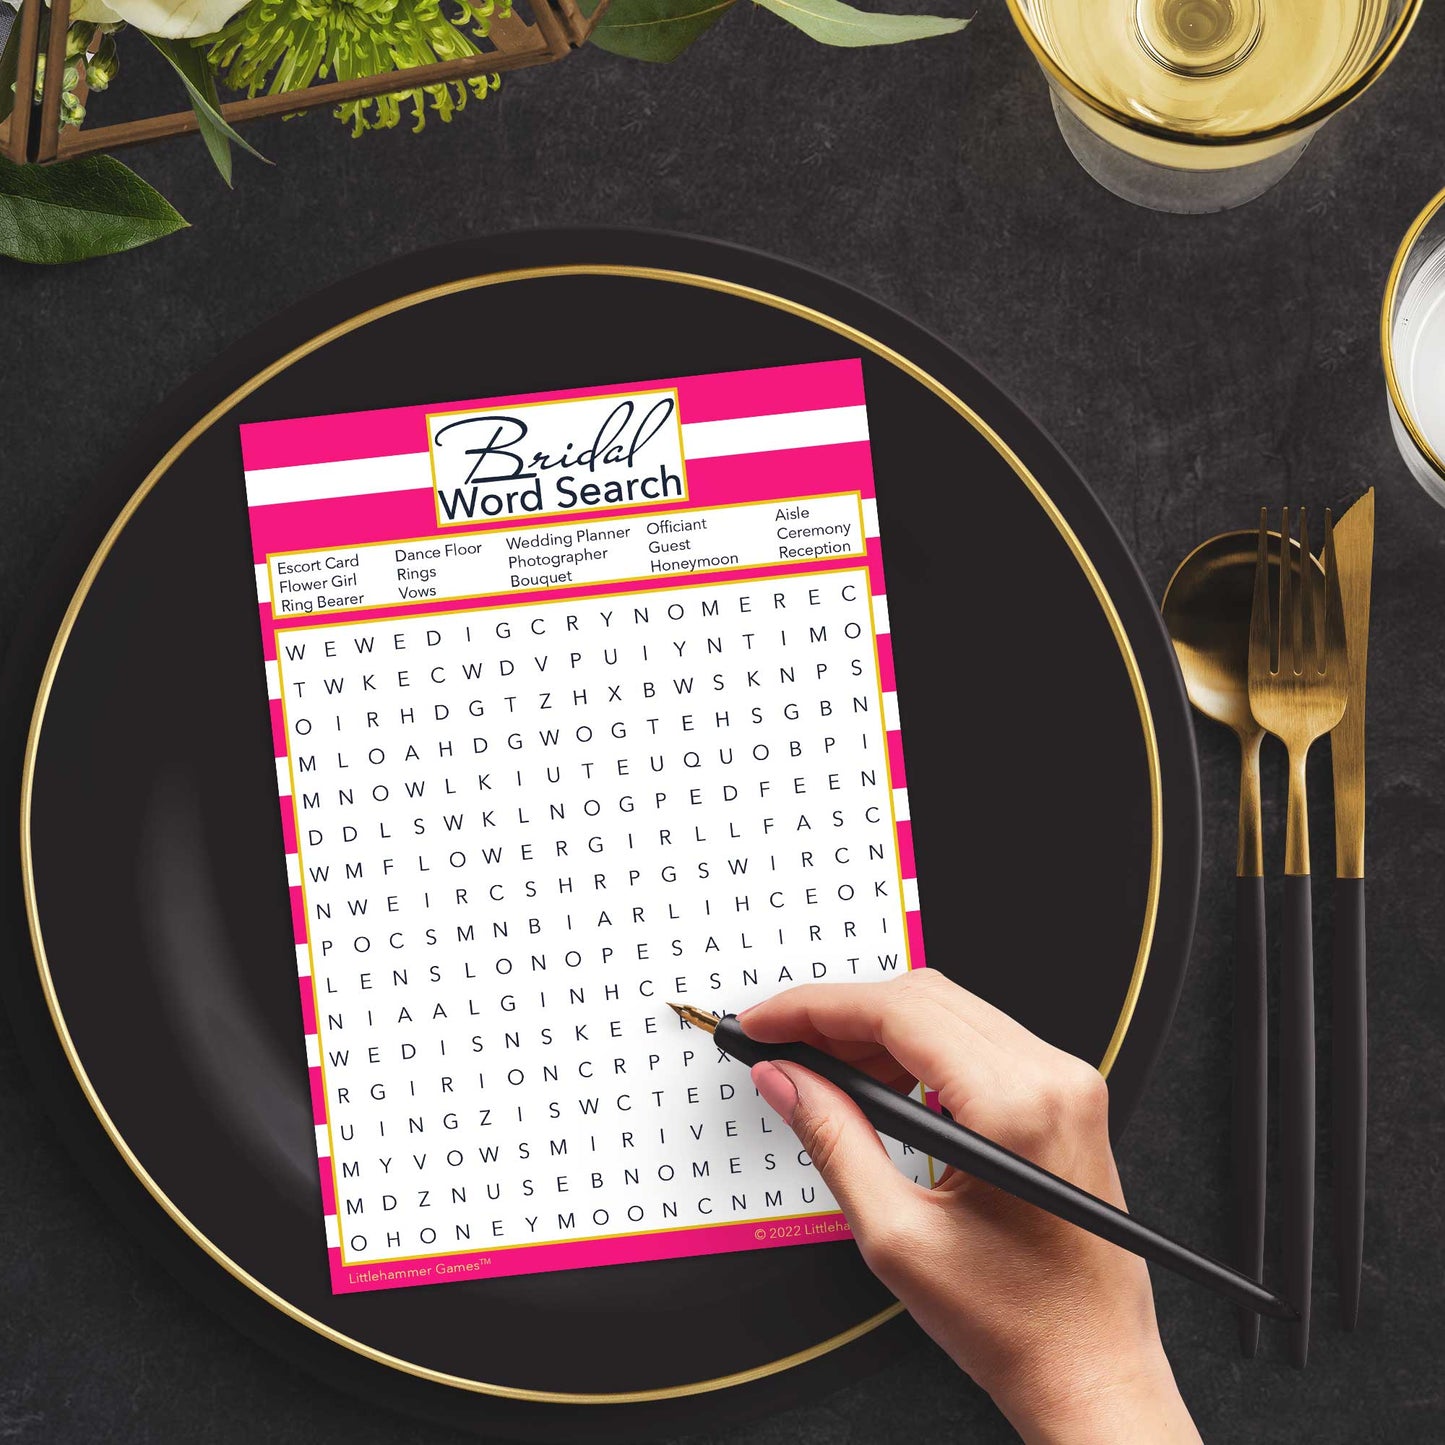 Woman with a pen playing a pink-striped Bridal Word Search game card at a dark place setting